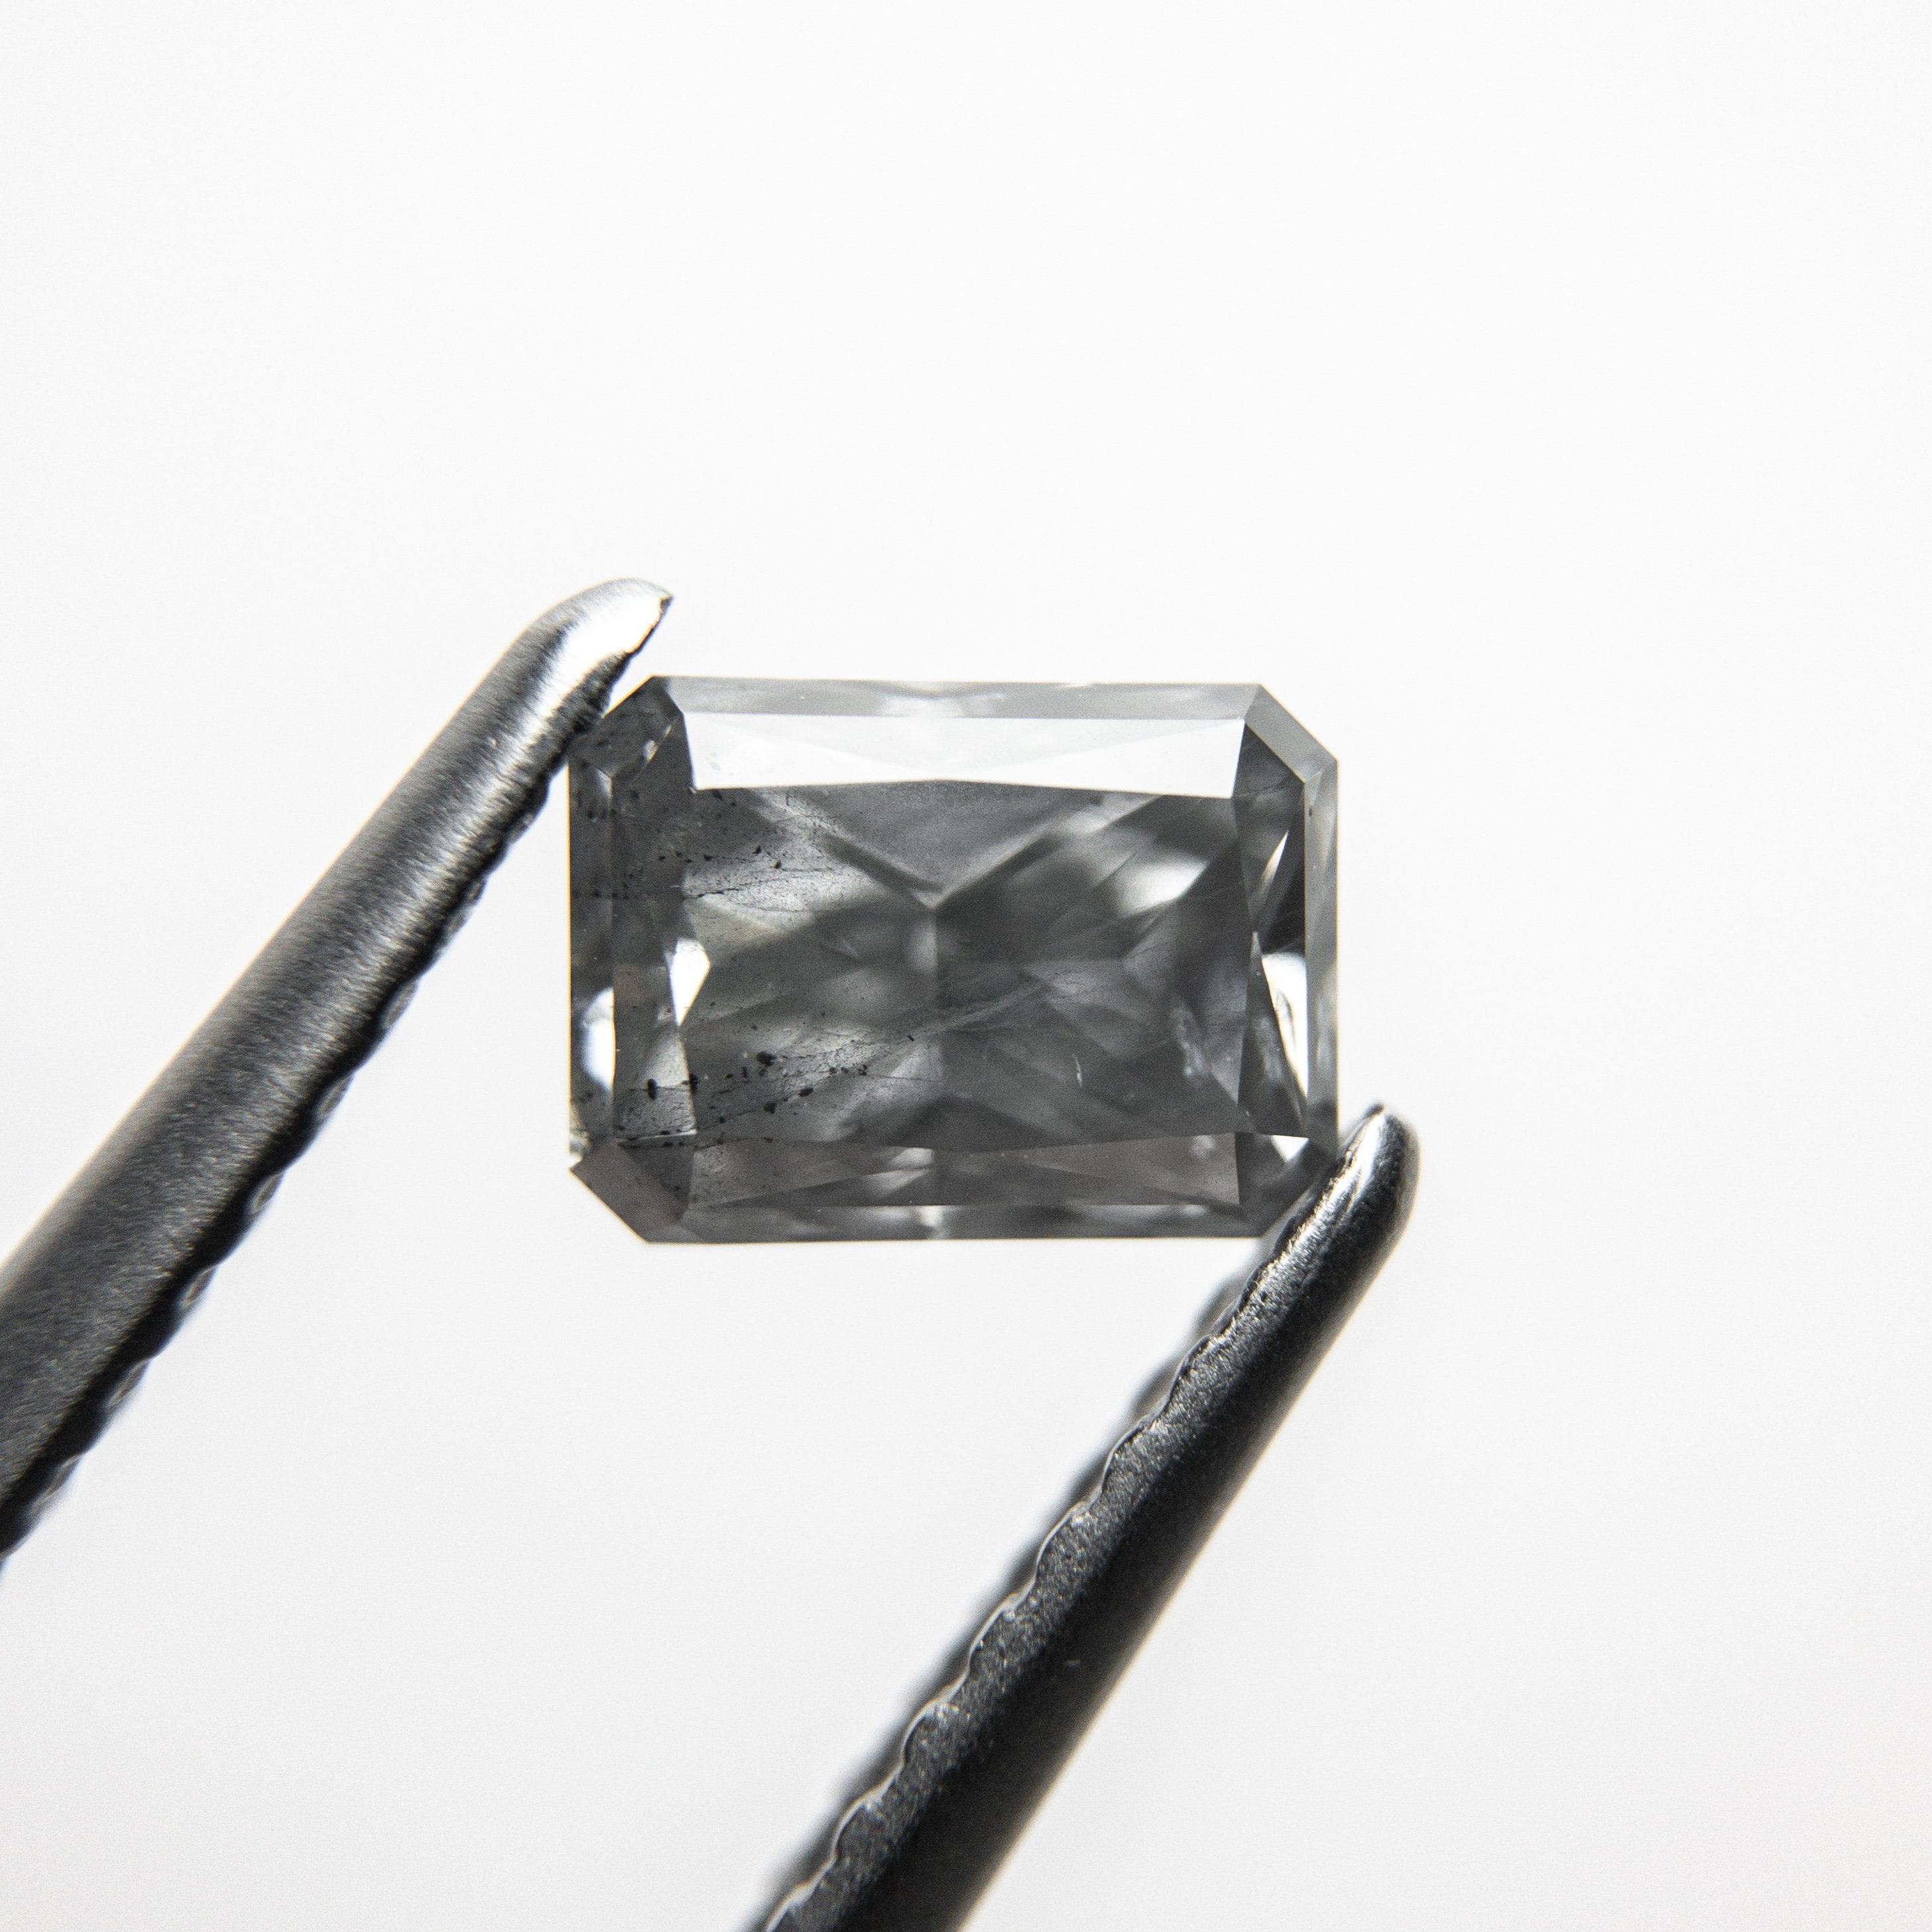 0.81ct 6.09x4.47x3.09mm GIA Fancy Grey Radiant Cut 18144-01 HOLD 06.2.20 D772